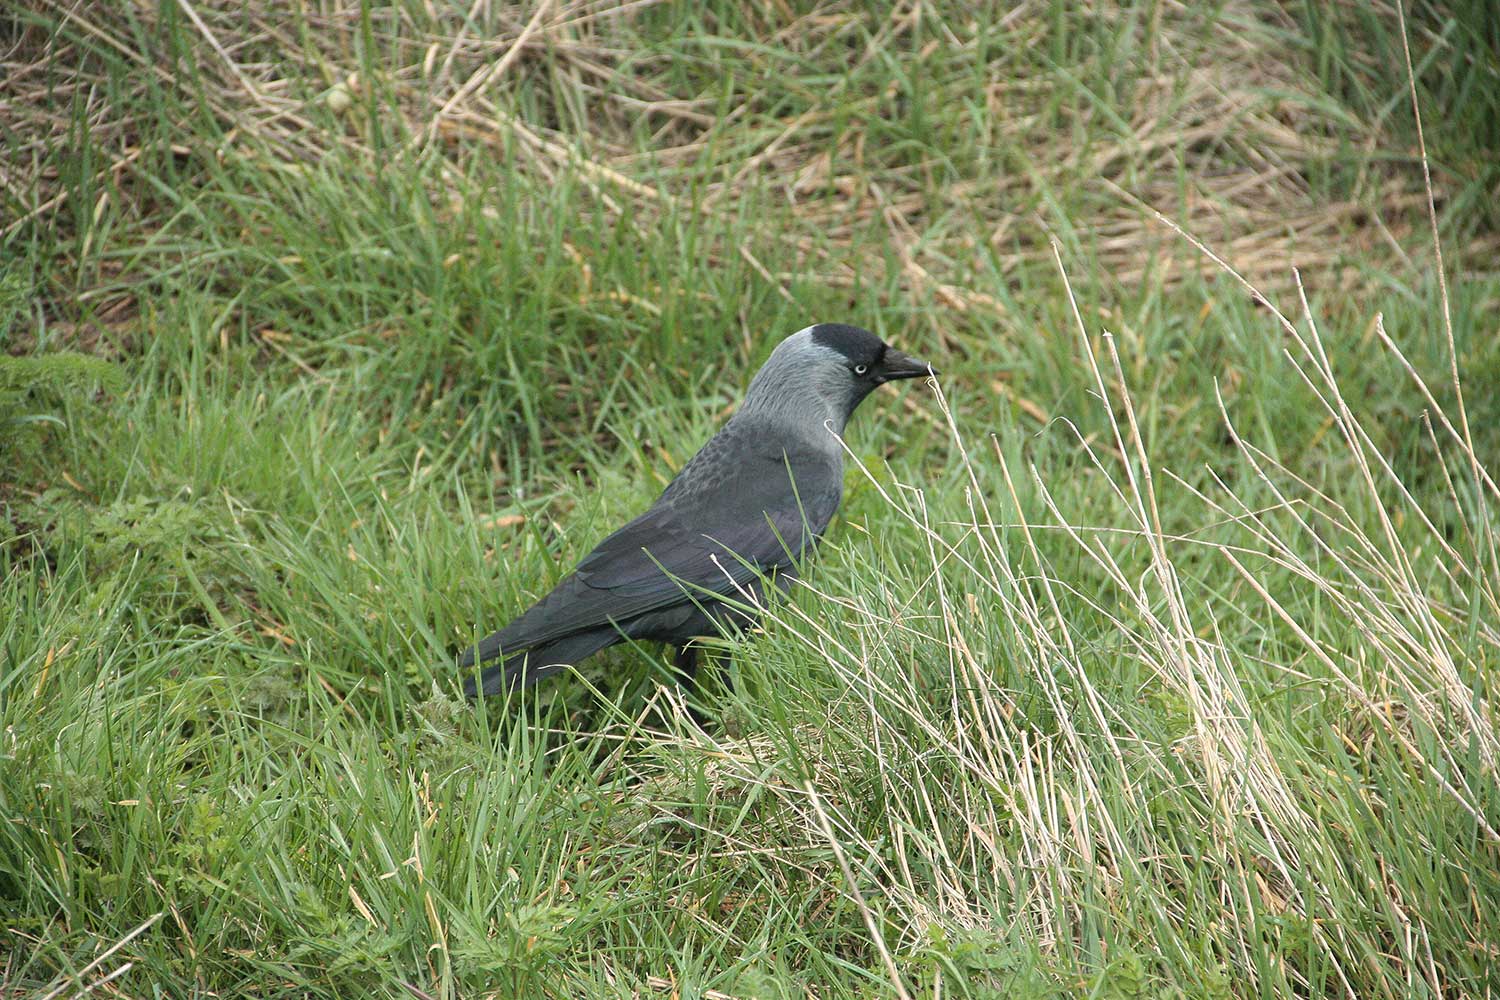 Jackdaw in the grass